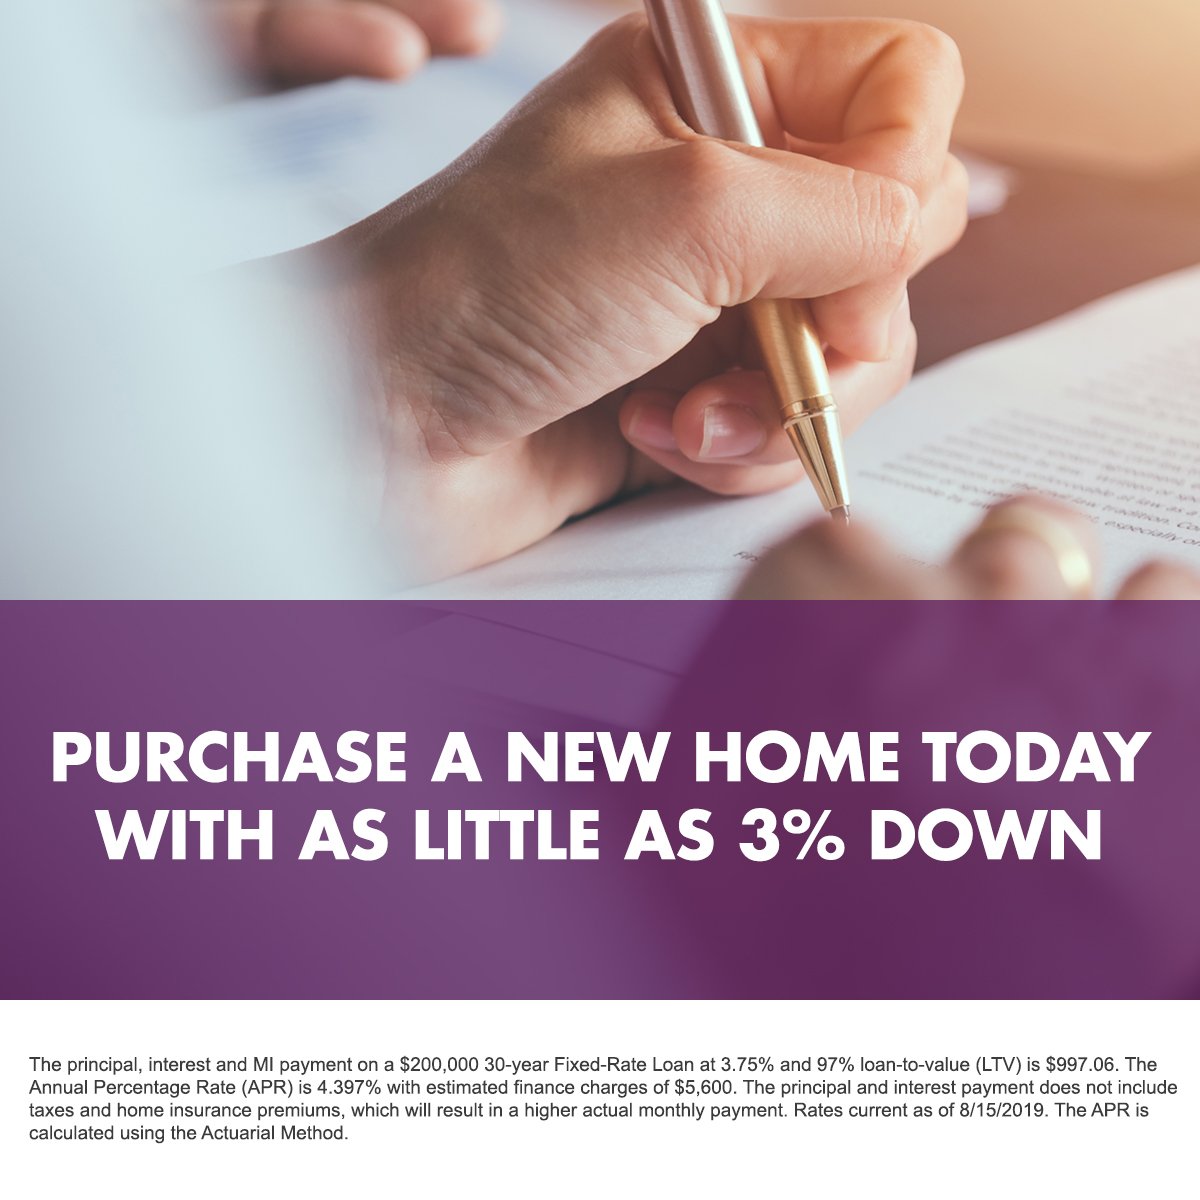 Don’t have a big down payment? FHA’s not your only option. Get a conventional 3% down loan today. Contact us for details! #lowdownpayment #mortgage #conventional97 #ocmortgagebroker